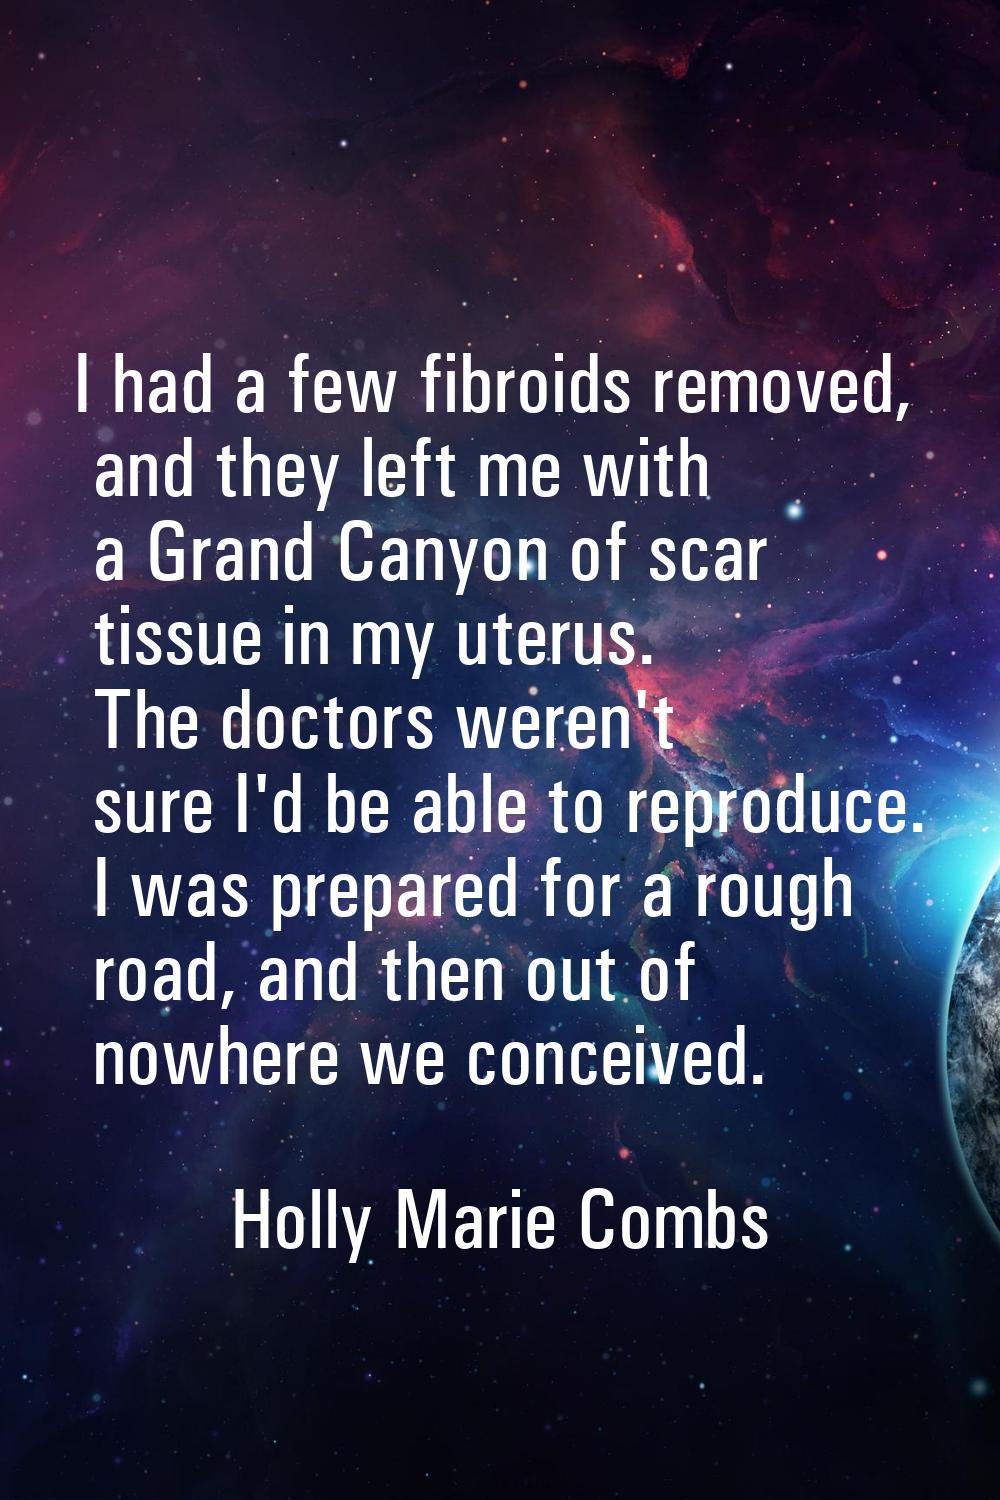 I had a few fibroids removed, and they left me with a Grand Canyon of scar tissue in my uterus. The